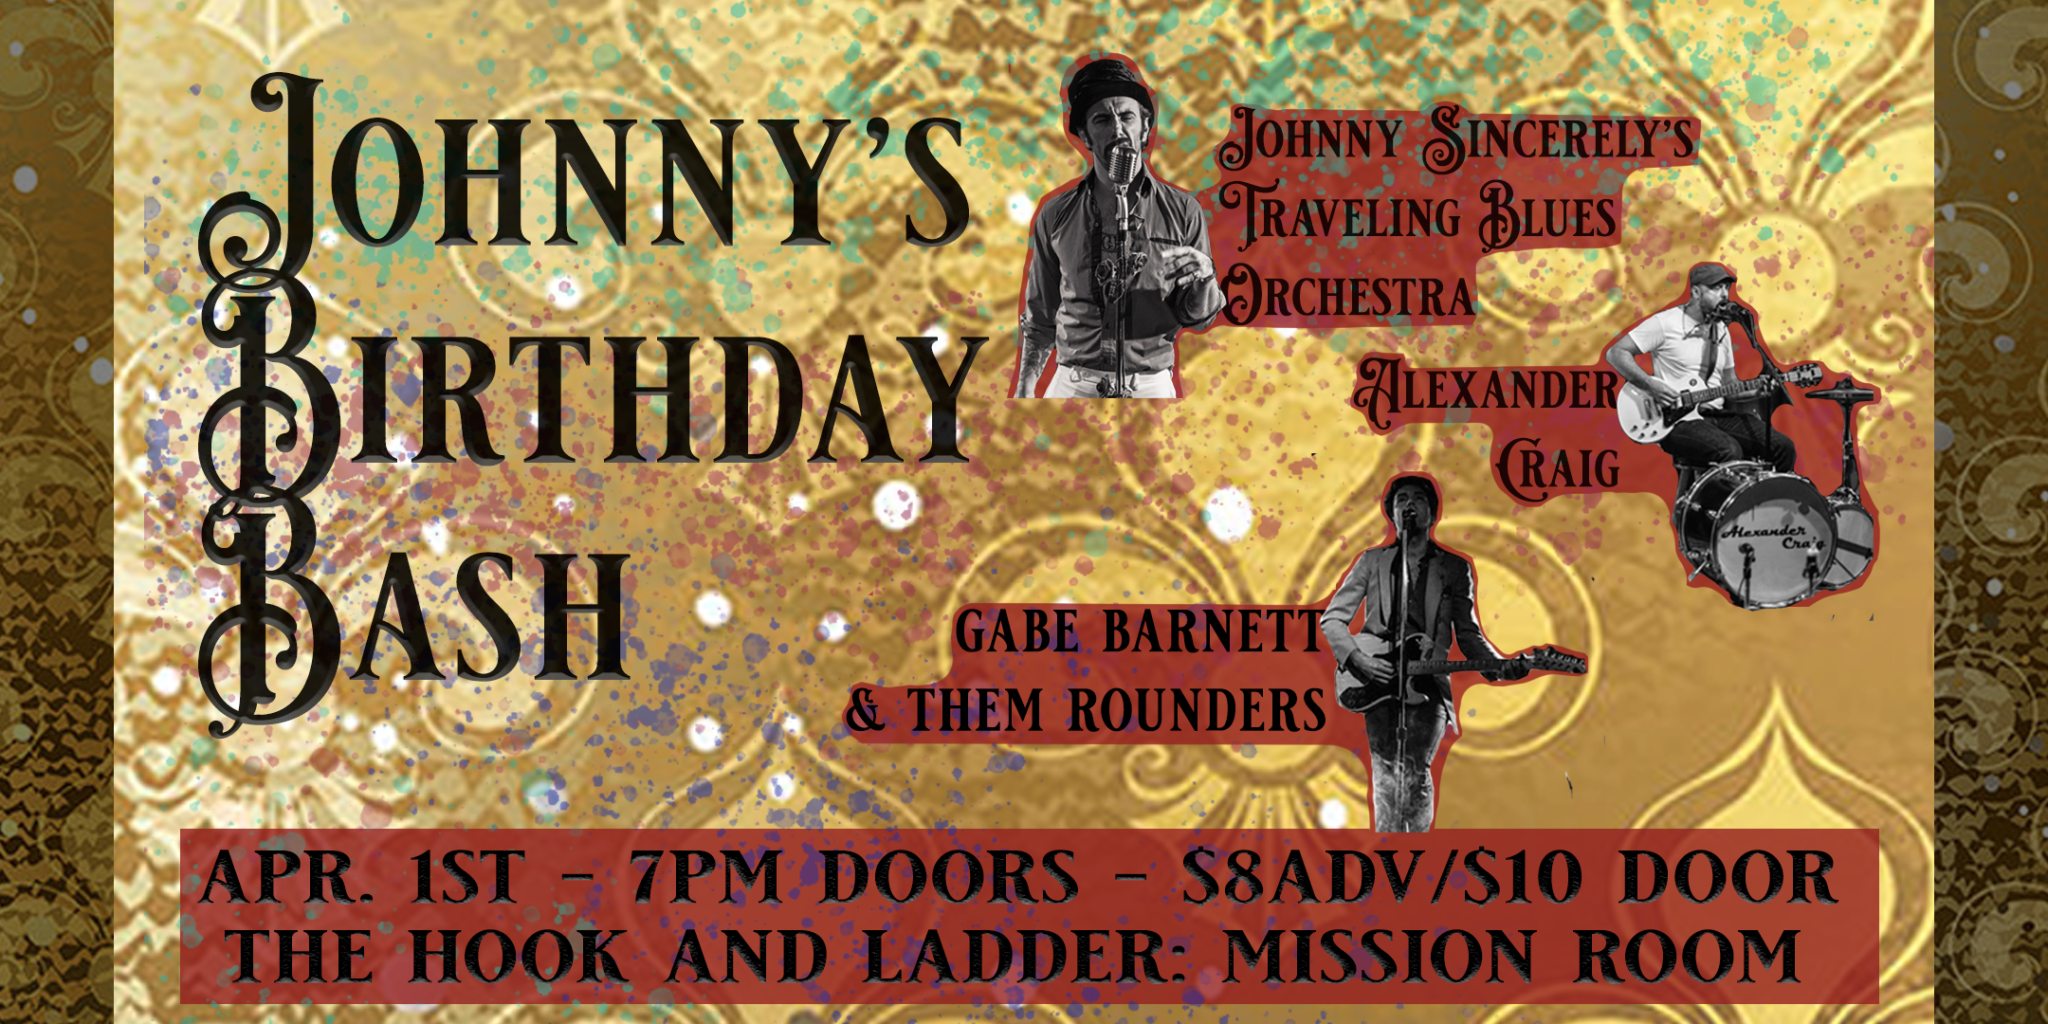 Johnny Sincerely B-Day Party with Johnny Sincerely Traveling Blues Orchestra, Alexander Craig and Gabe Barnet & Them Rounders on Friday, April 1 at The Hook and Ladder Mission Room